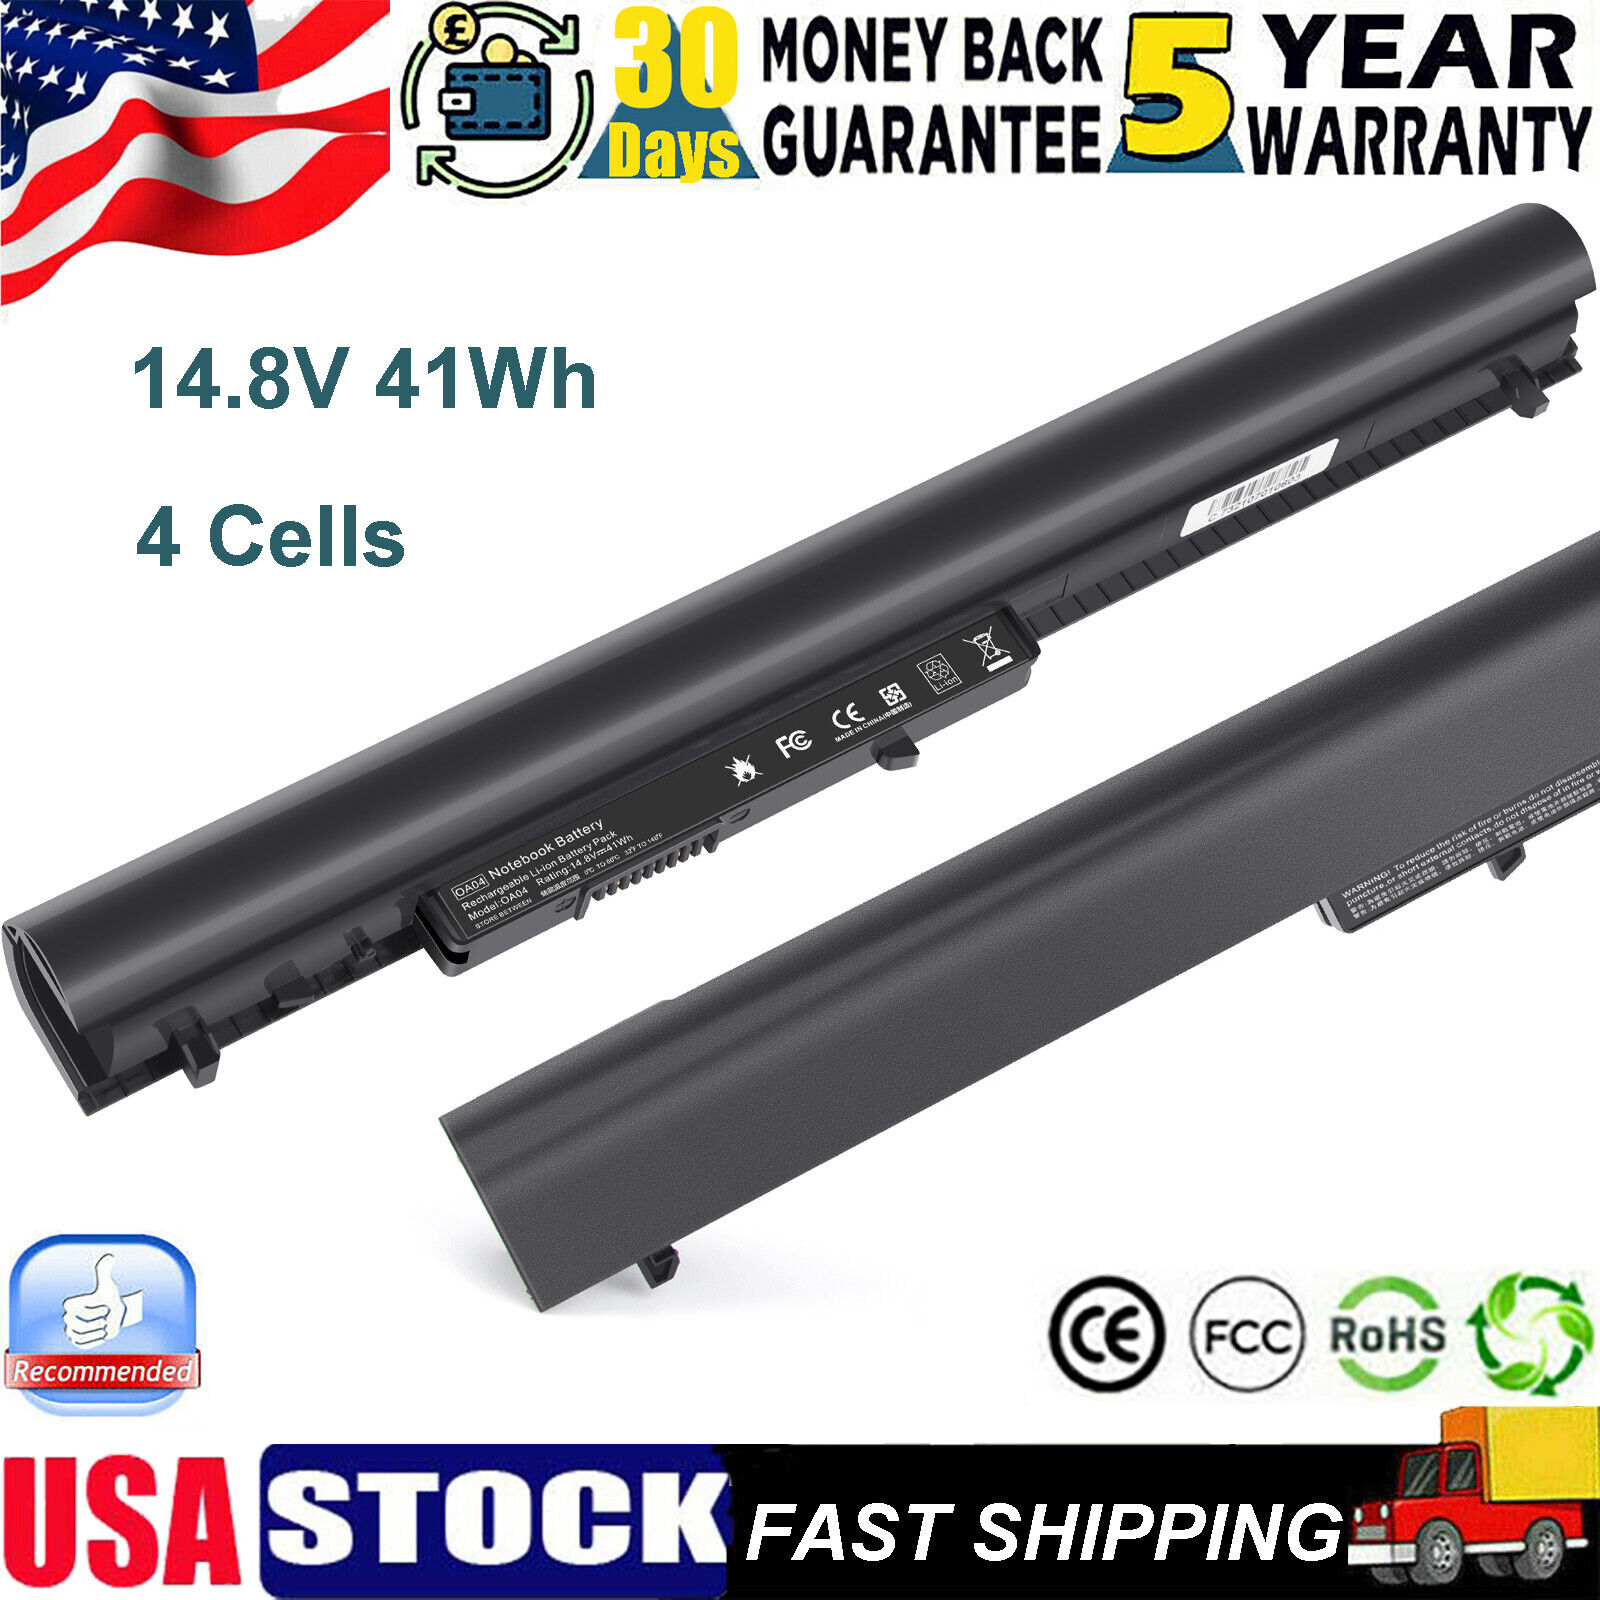 4 Cells Spare 746641-001 Battery For HP OA03 OA04 740715-001 746458-421 Laptop